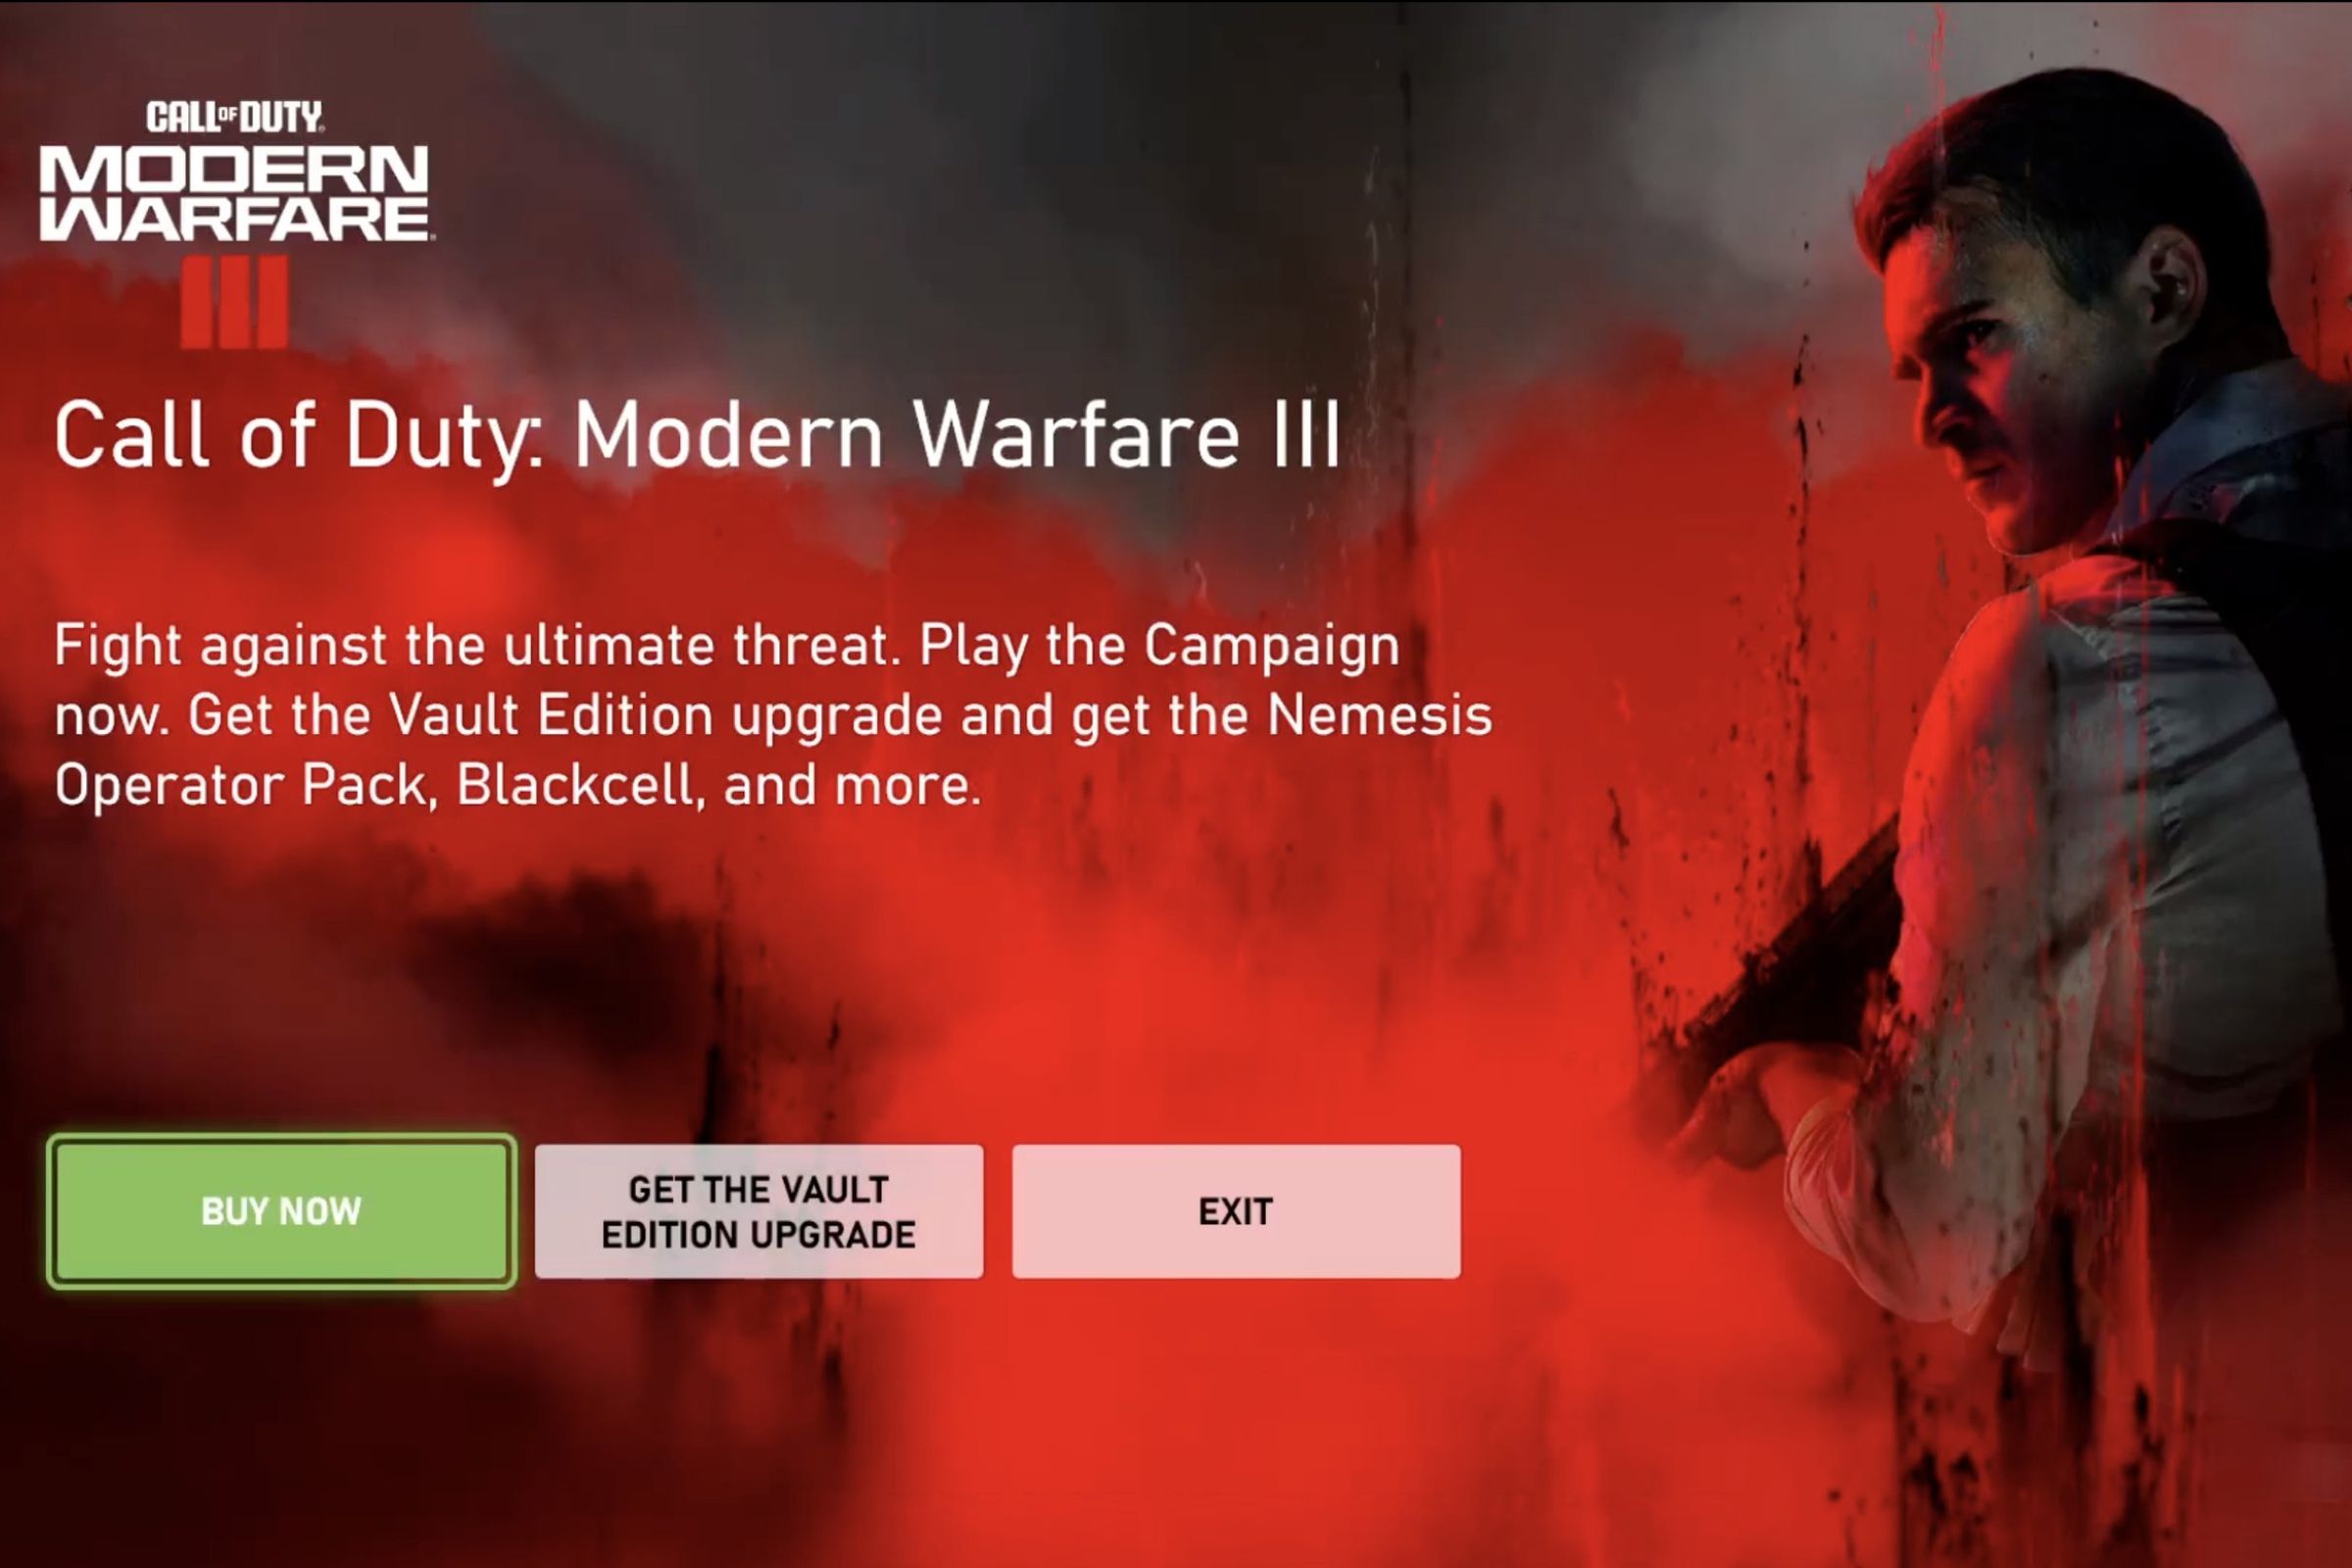 A pop-up ad on Xbox for Call of Duty: Modern Warfare III